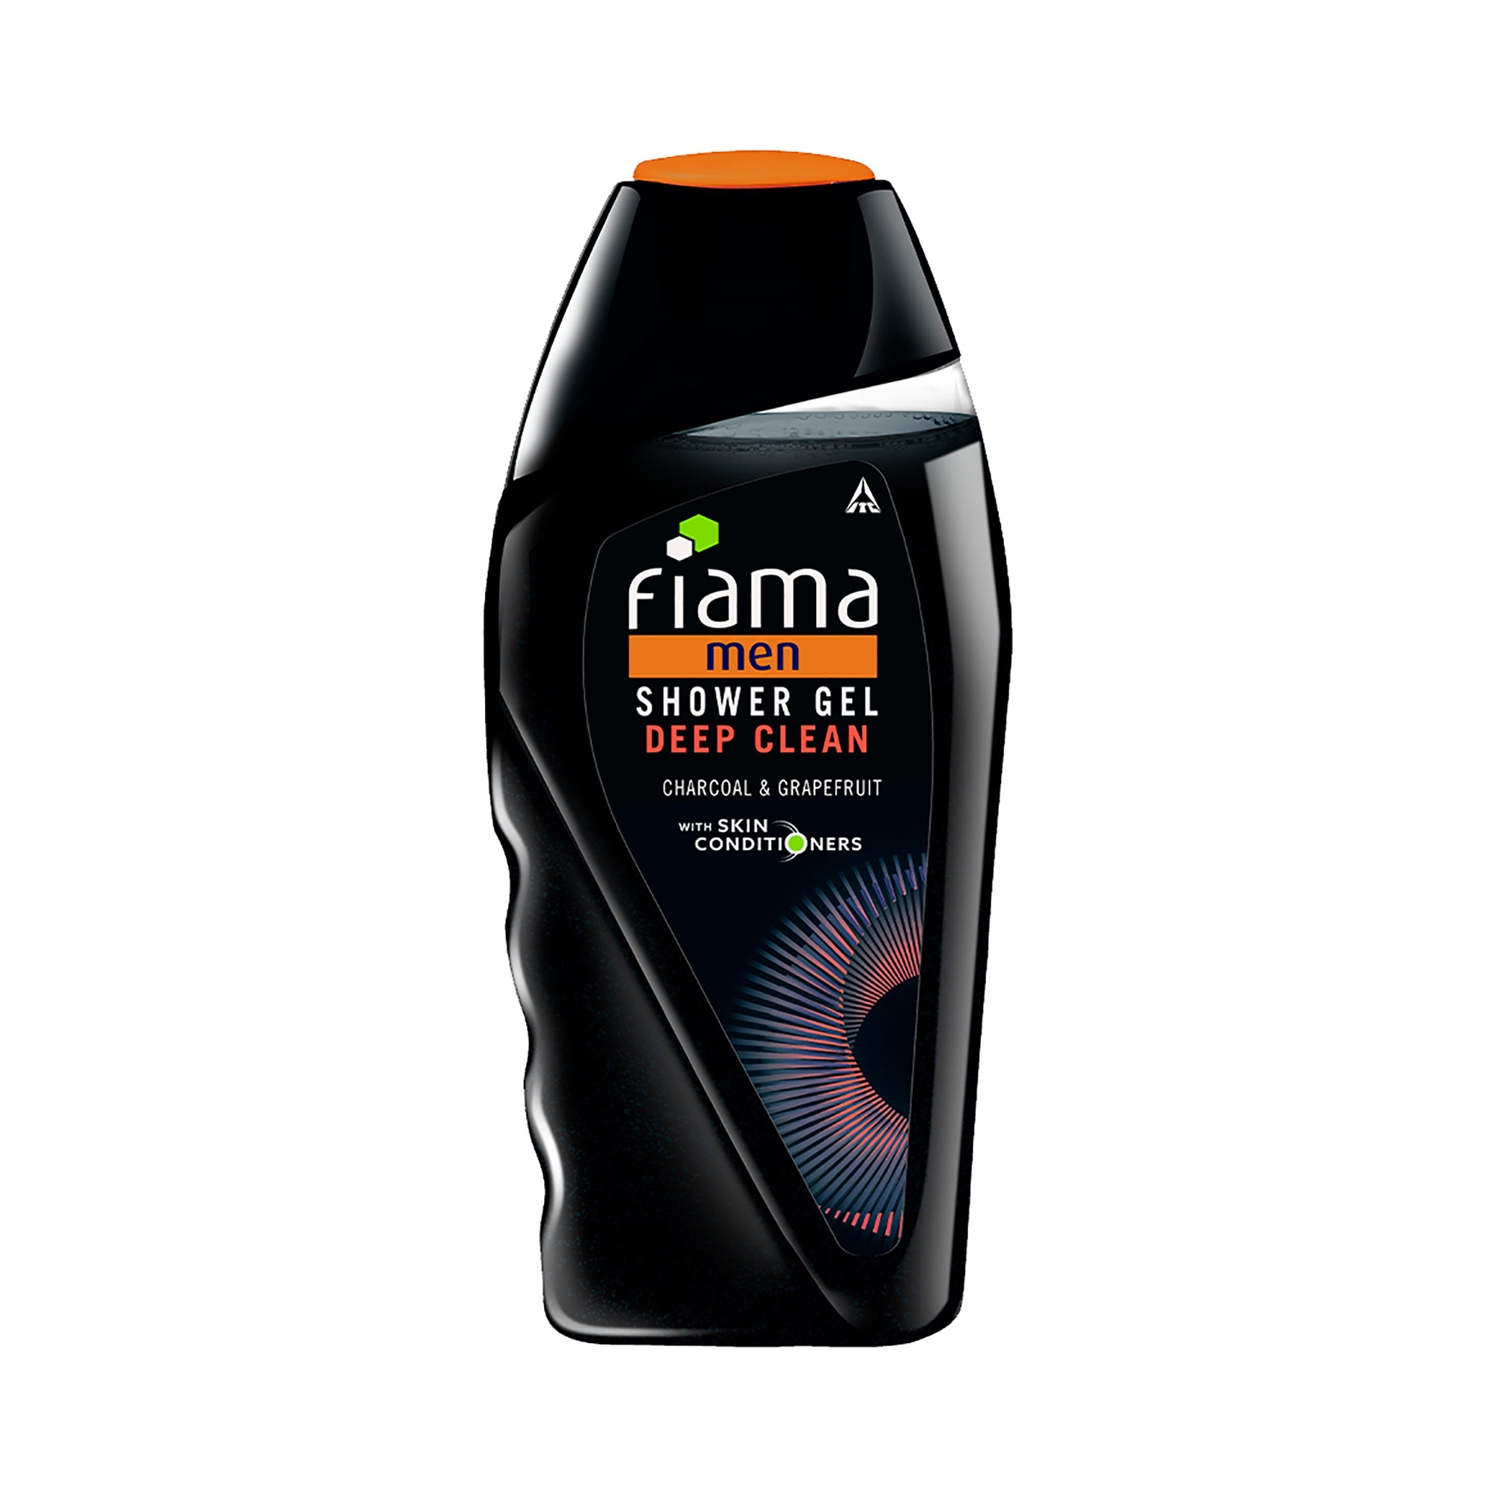 Fiama Deep Clean Men Shower Gel With Charcoal And Grapefruit (250ml)